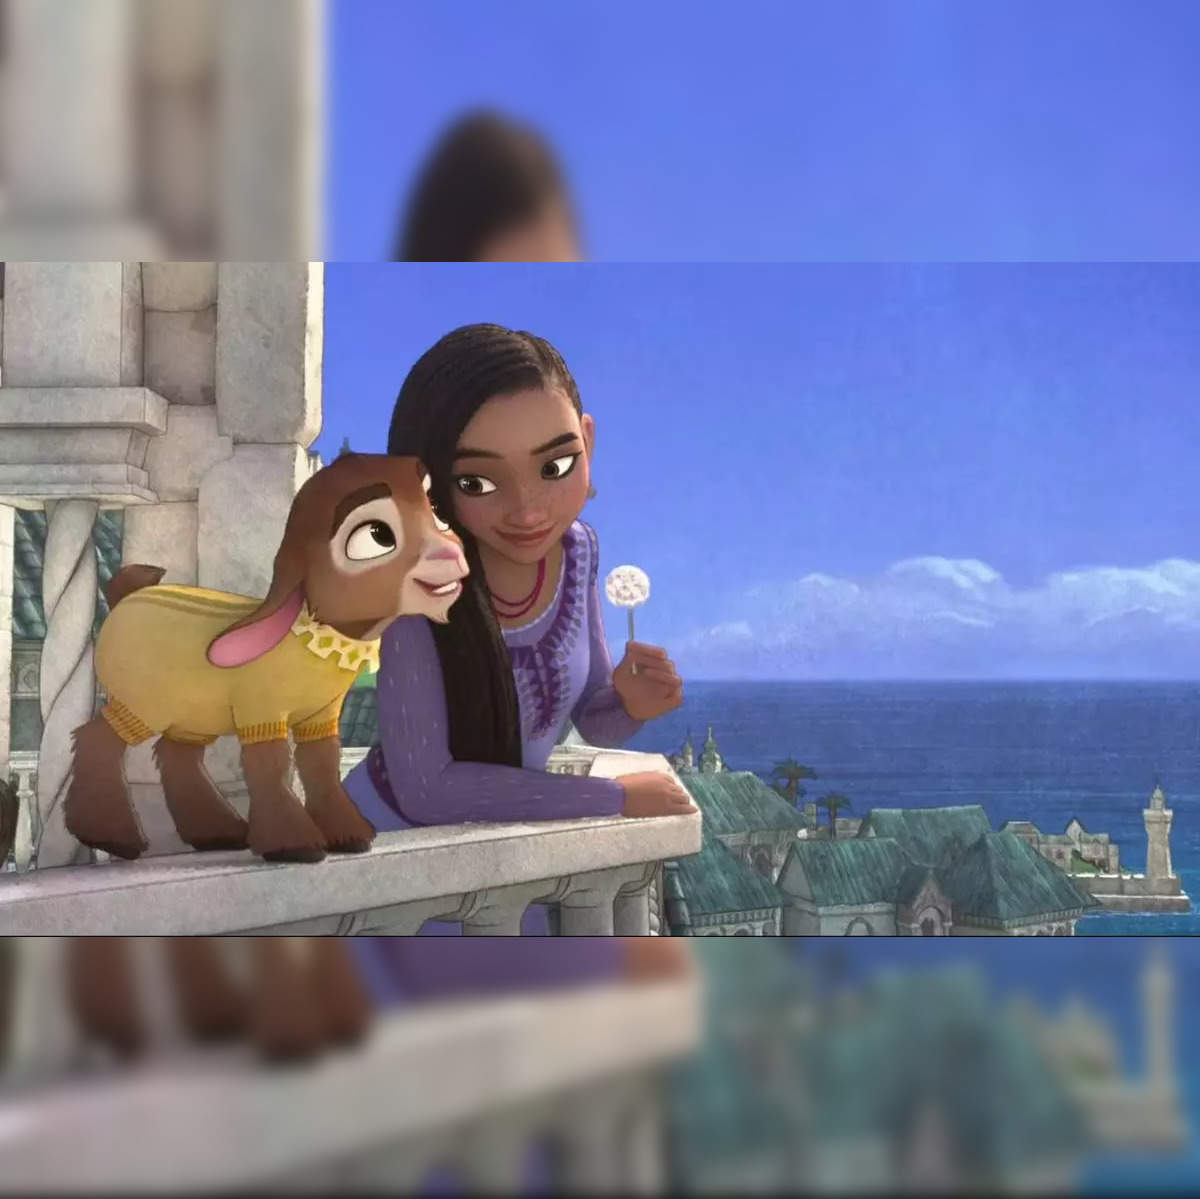 Wish: Disney's Asha Vs. Other Princesses: Differences Explained by Director  (Exclusive)